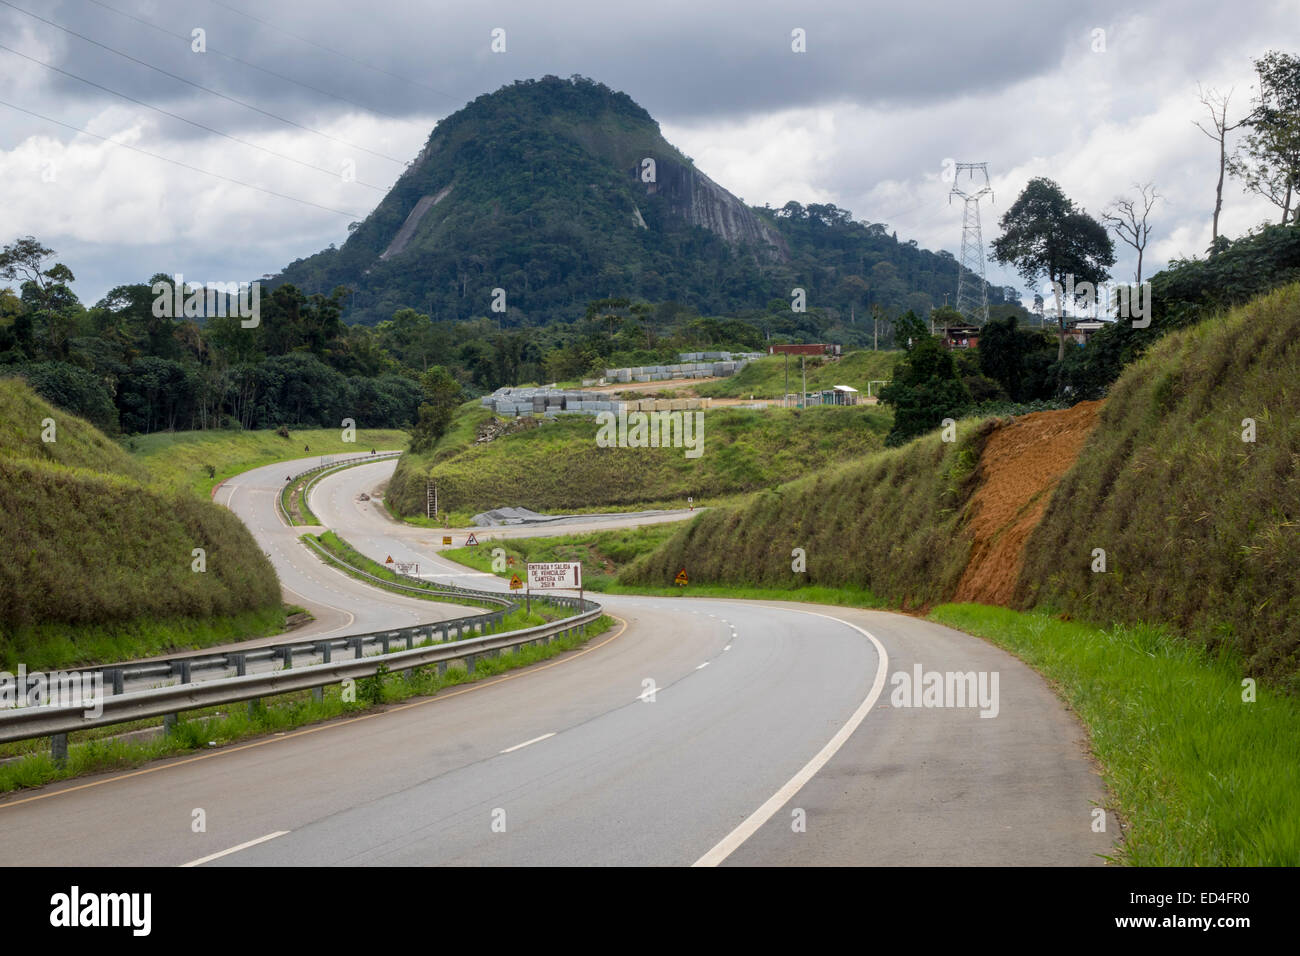 Dual carriageway modern highway past distinctive mountain on way to the ...